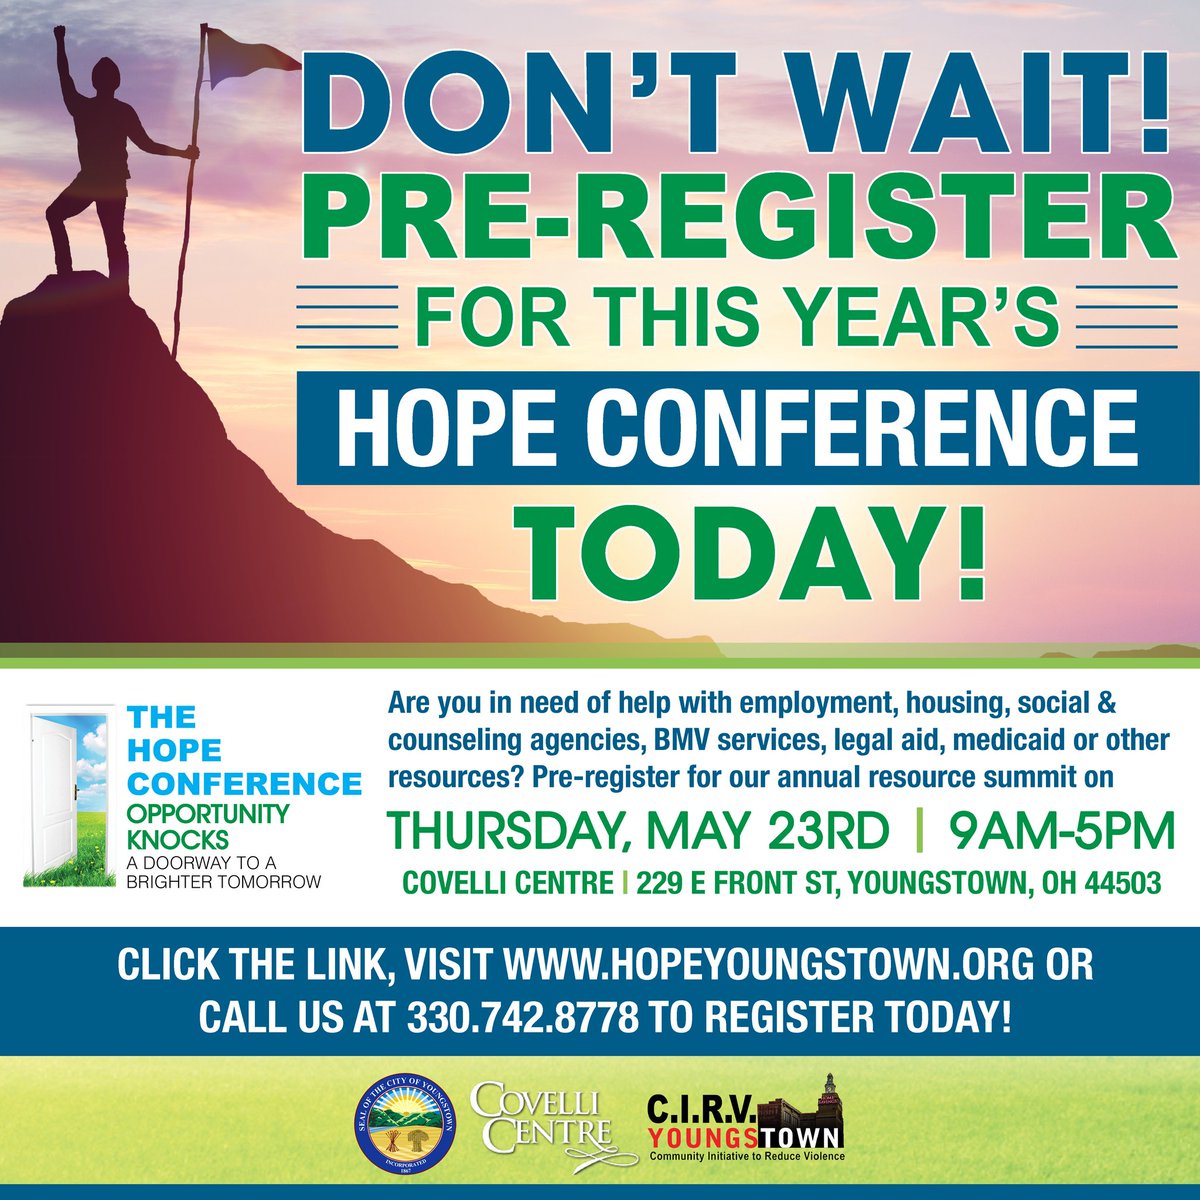 Find what you need at the Hope Conference. Click the link below, visit our website at hopeyoungstown.org or call 330.742.8778 to pre-register today!
form.jotform.com/221114242318038